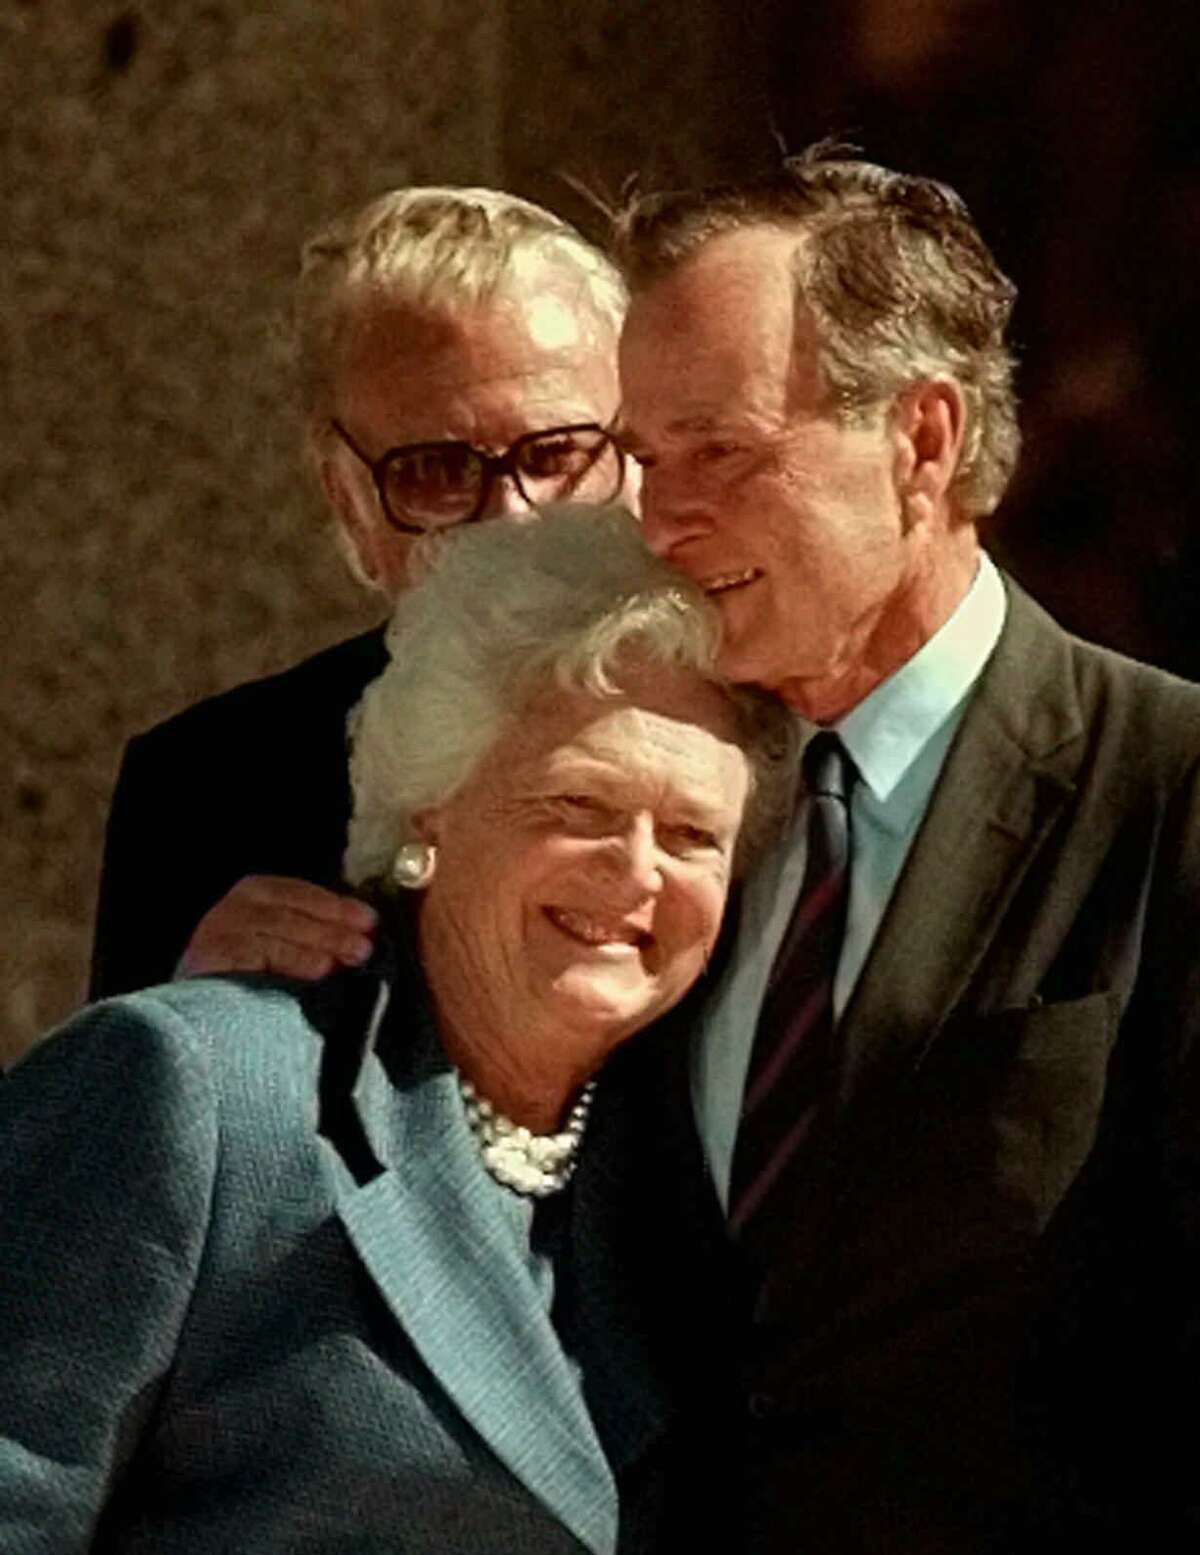 In this Nov. 6, 1997, file photo, former President George H.W. Bush hugs his wife, Barbara, after speaking at the dedication of the George Bush Presidential Library in College Station, Texas. The Bushes were married Jan. 6, 1945, and have had the longest marriage of any presidential couple in American history.